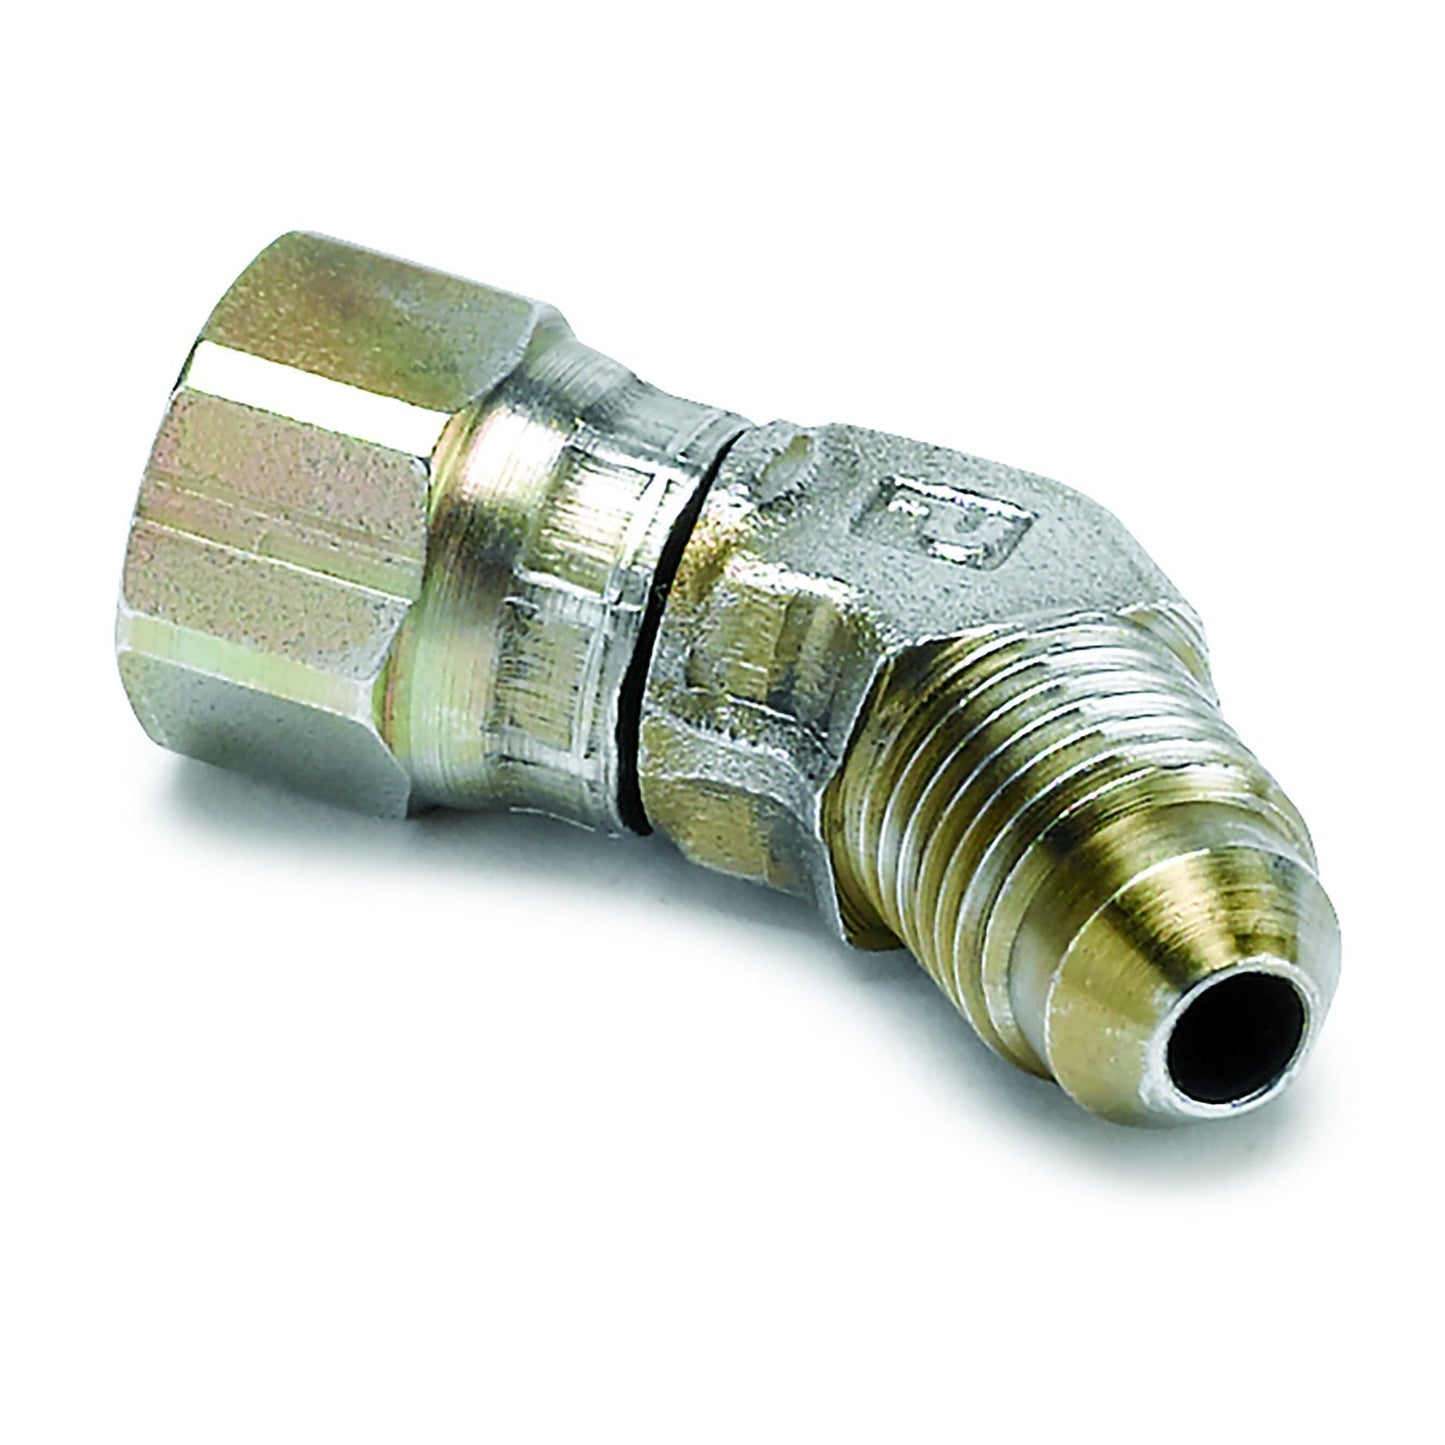 AutoMeter - FITTING, ADAPTER, 45 °, -4AN FEMALE TO -4AN MALE, STEEL (3273)